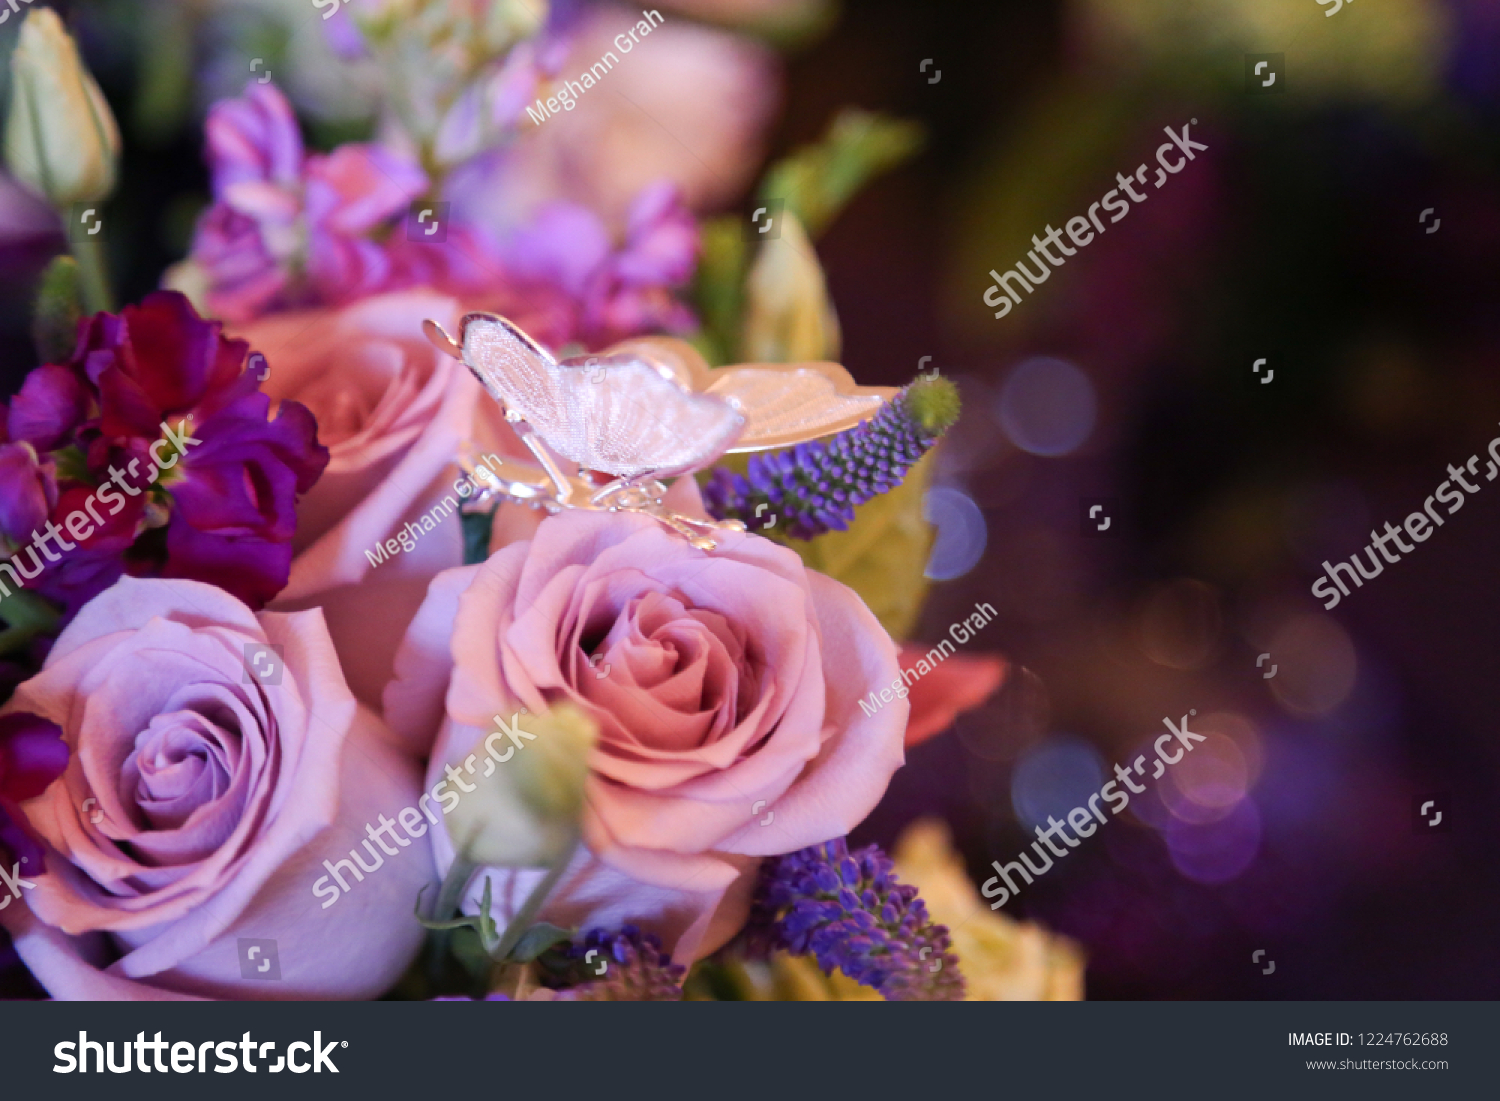 Purple Wedding Bouquet Butterfly Blurry Background Stock Photo Edit Now 1224762688